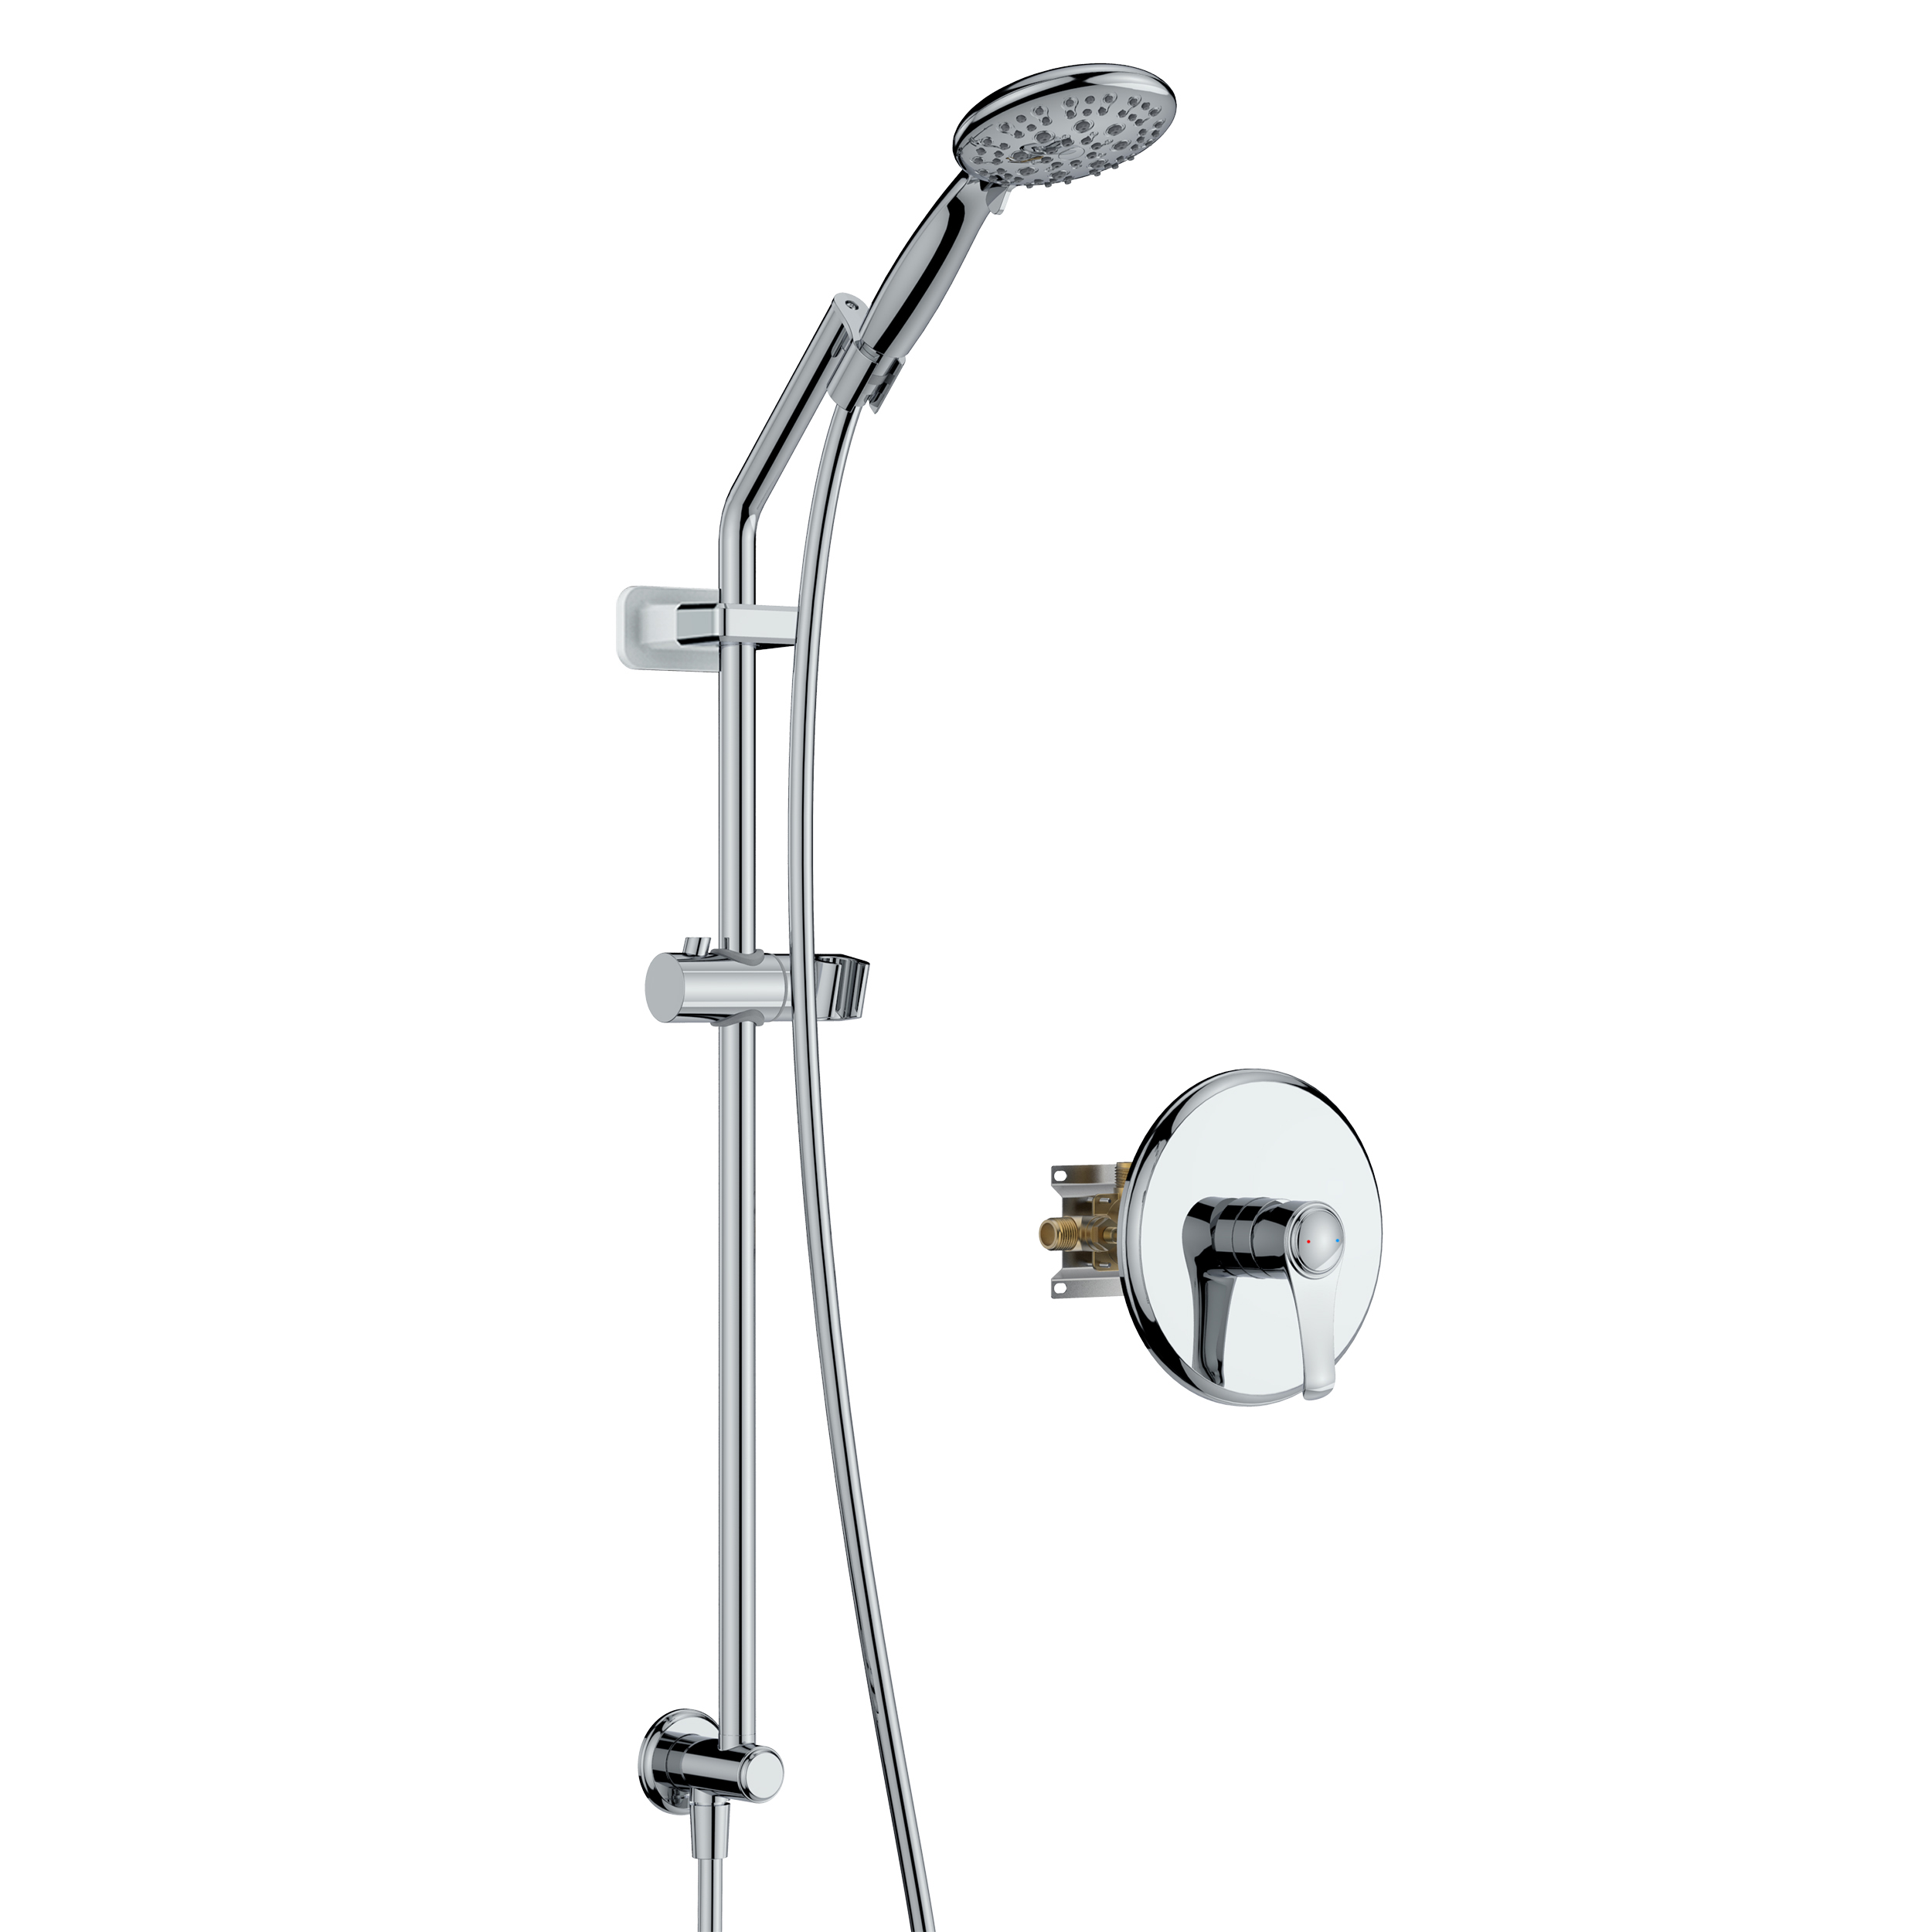 Large Amount of water Multi Function Shower Head - Shower System with 4." Rain Showerhead, 6-Function Hand Shower, Simple Style, Chrome